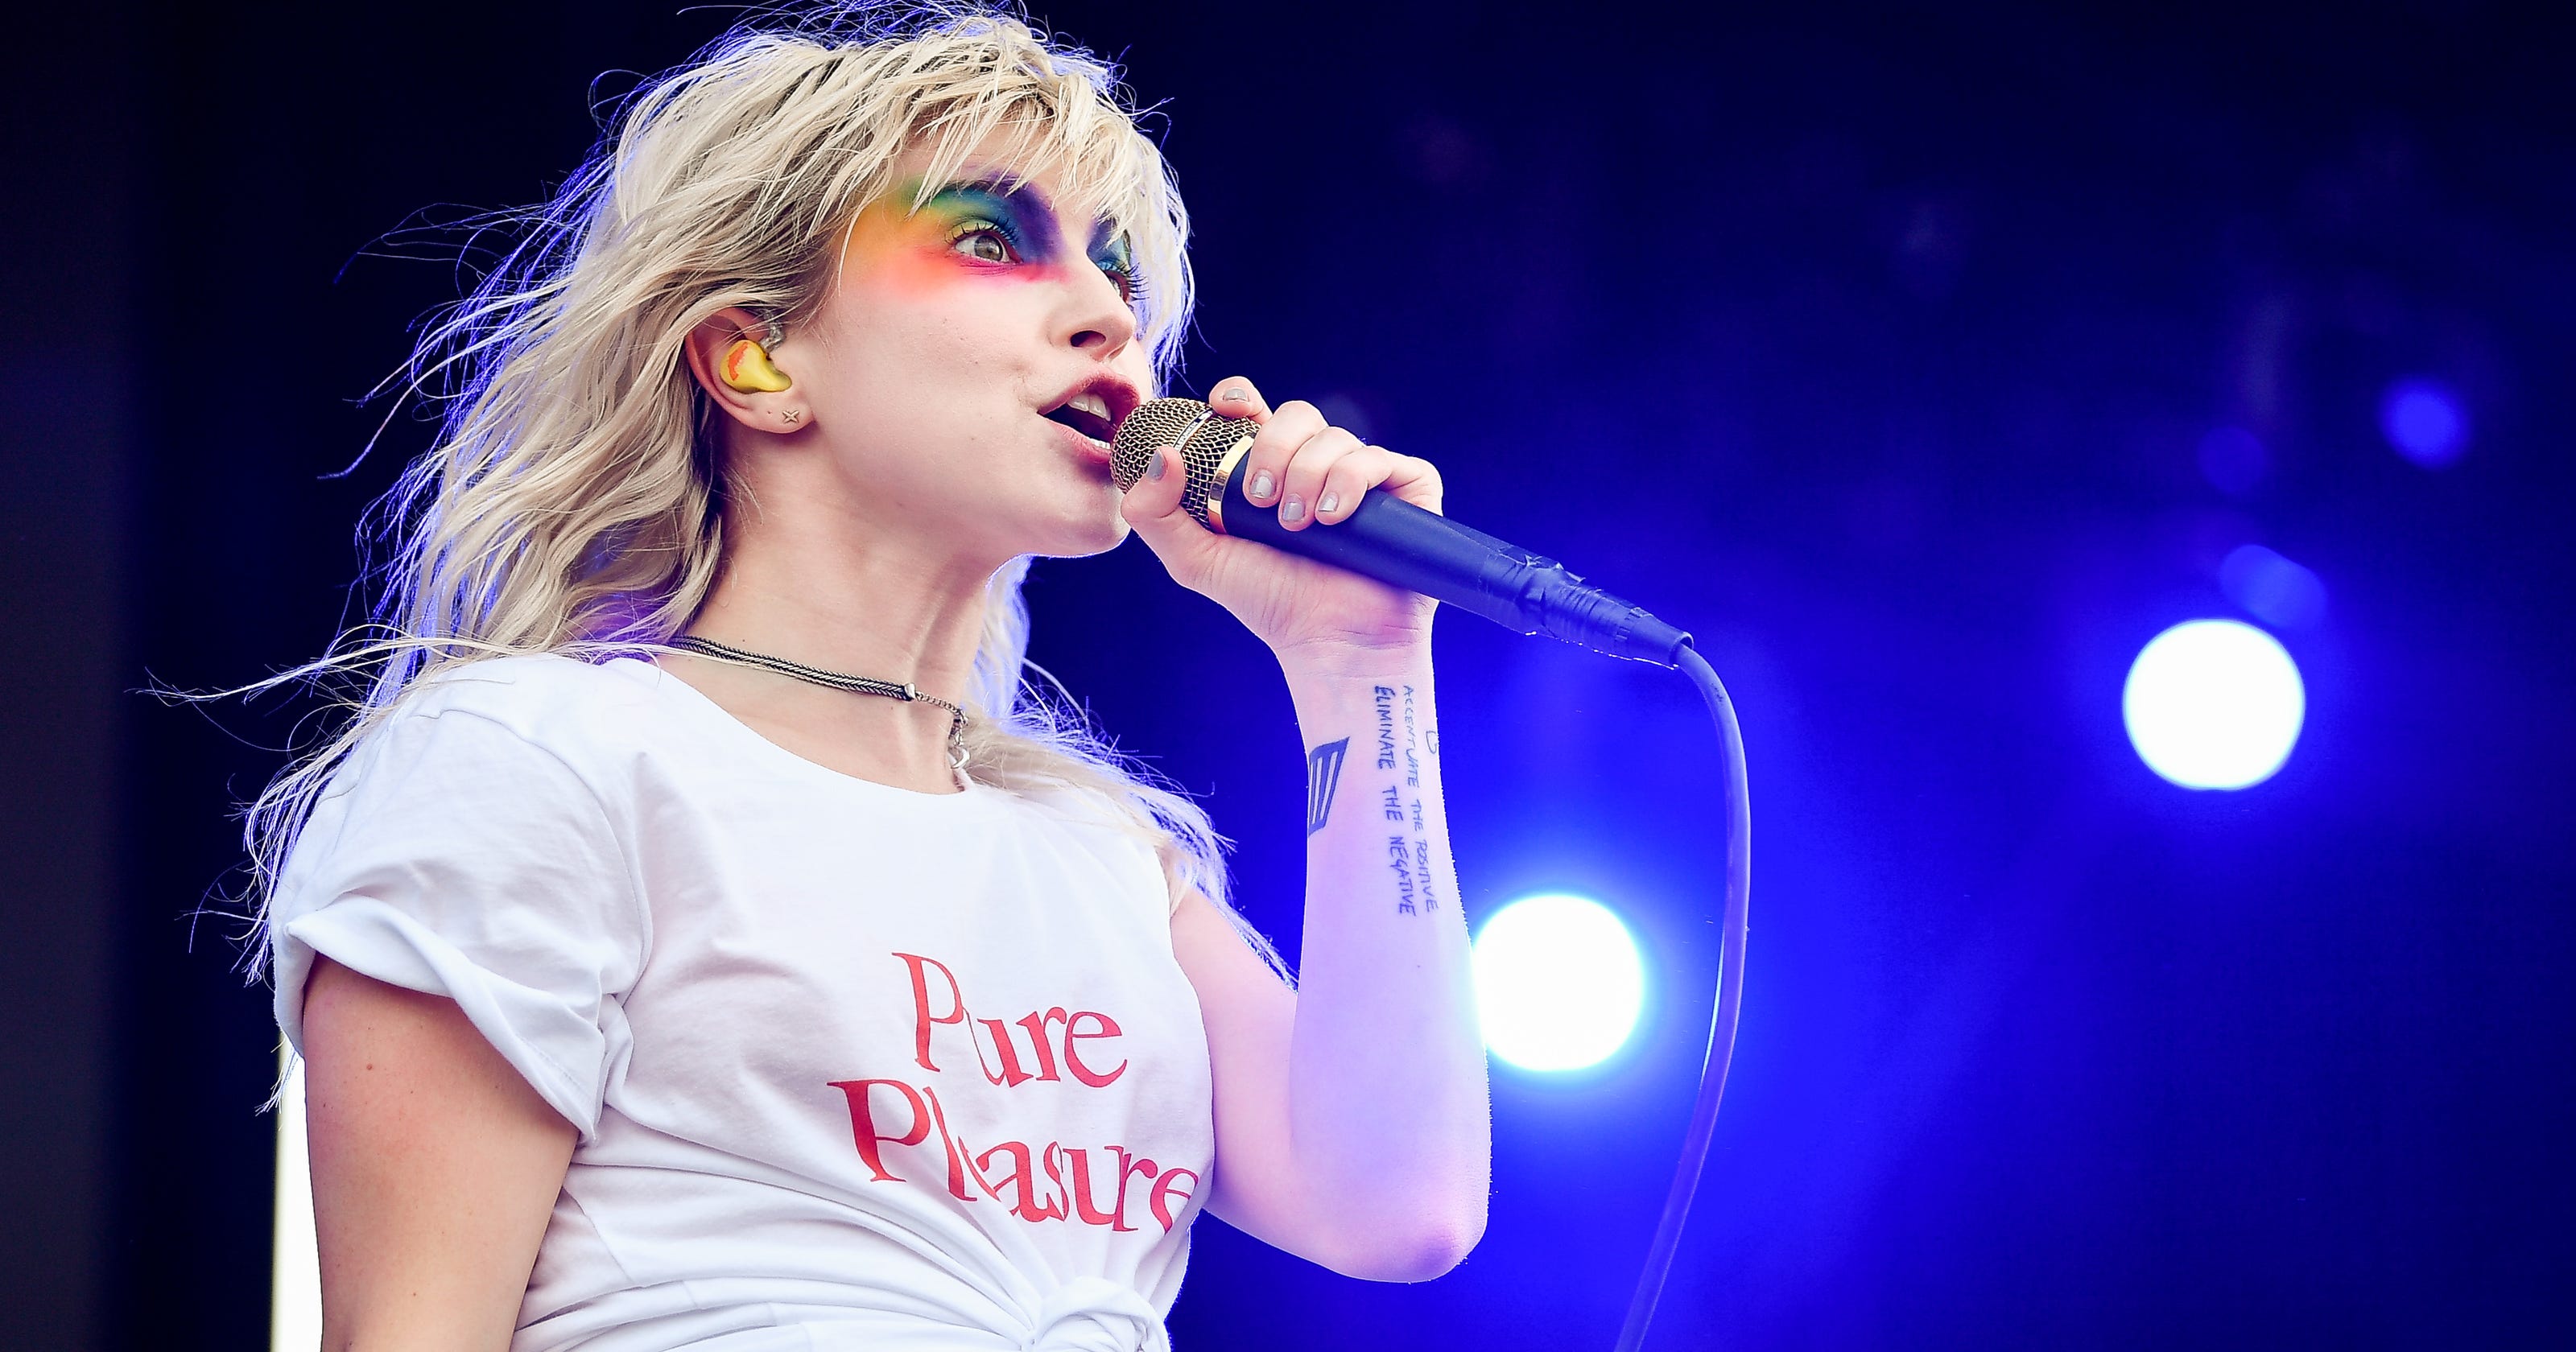 Paramore's Hayley Williams says she survived thanks to 'art and friends'